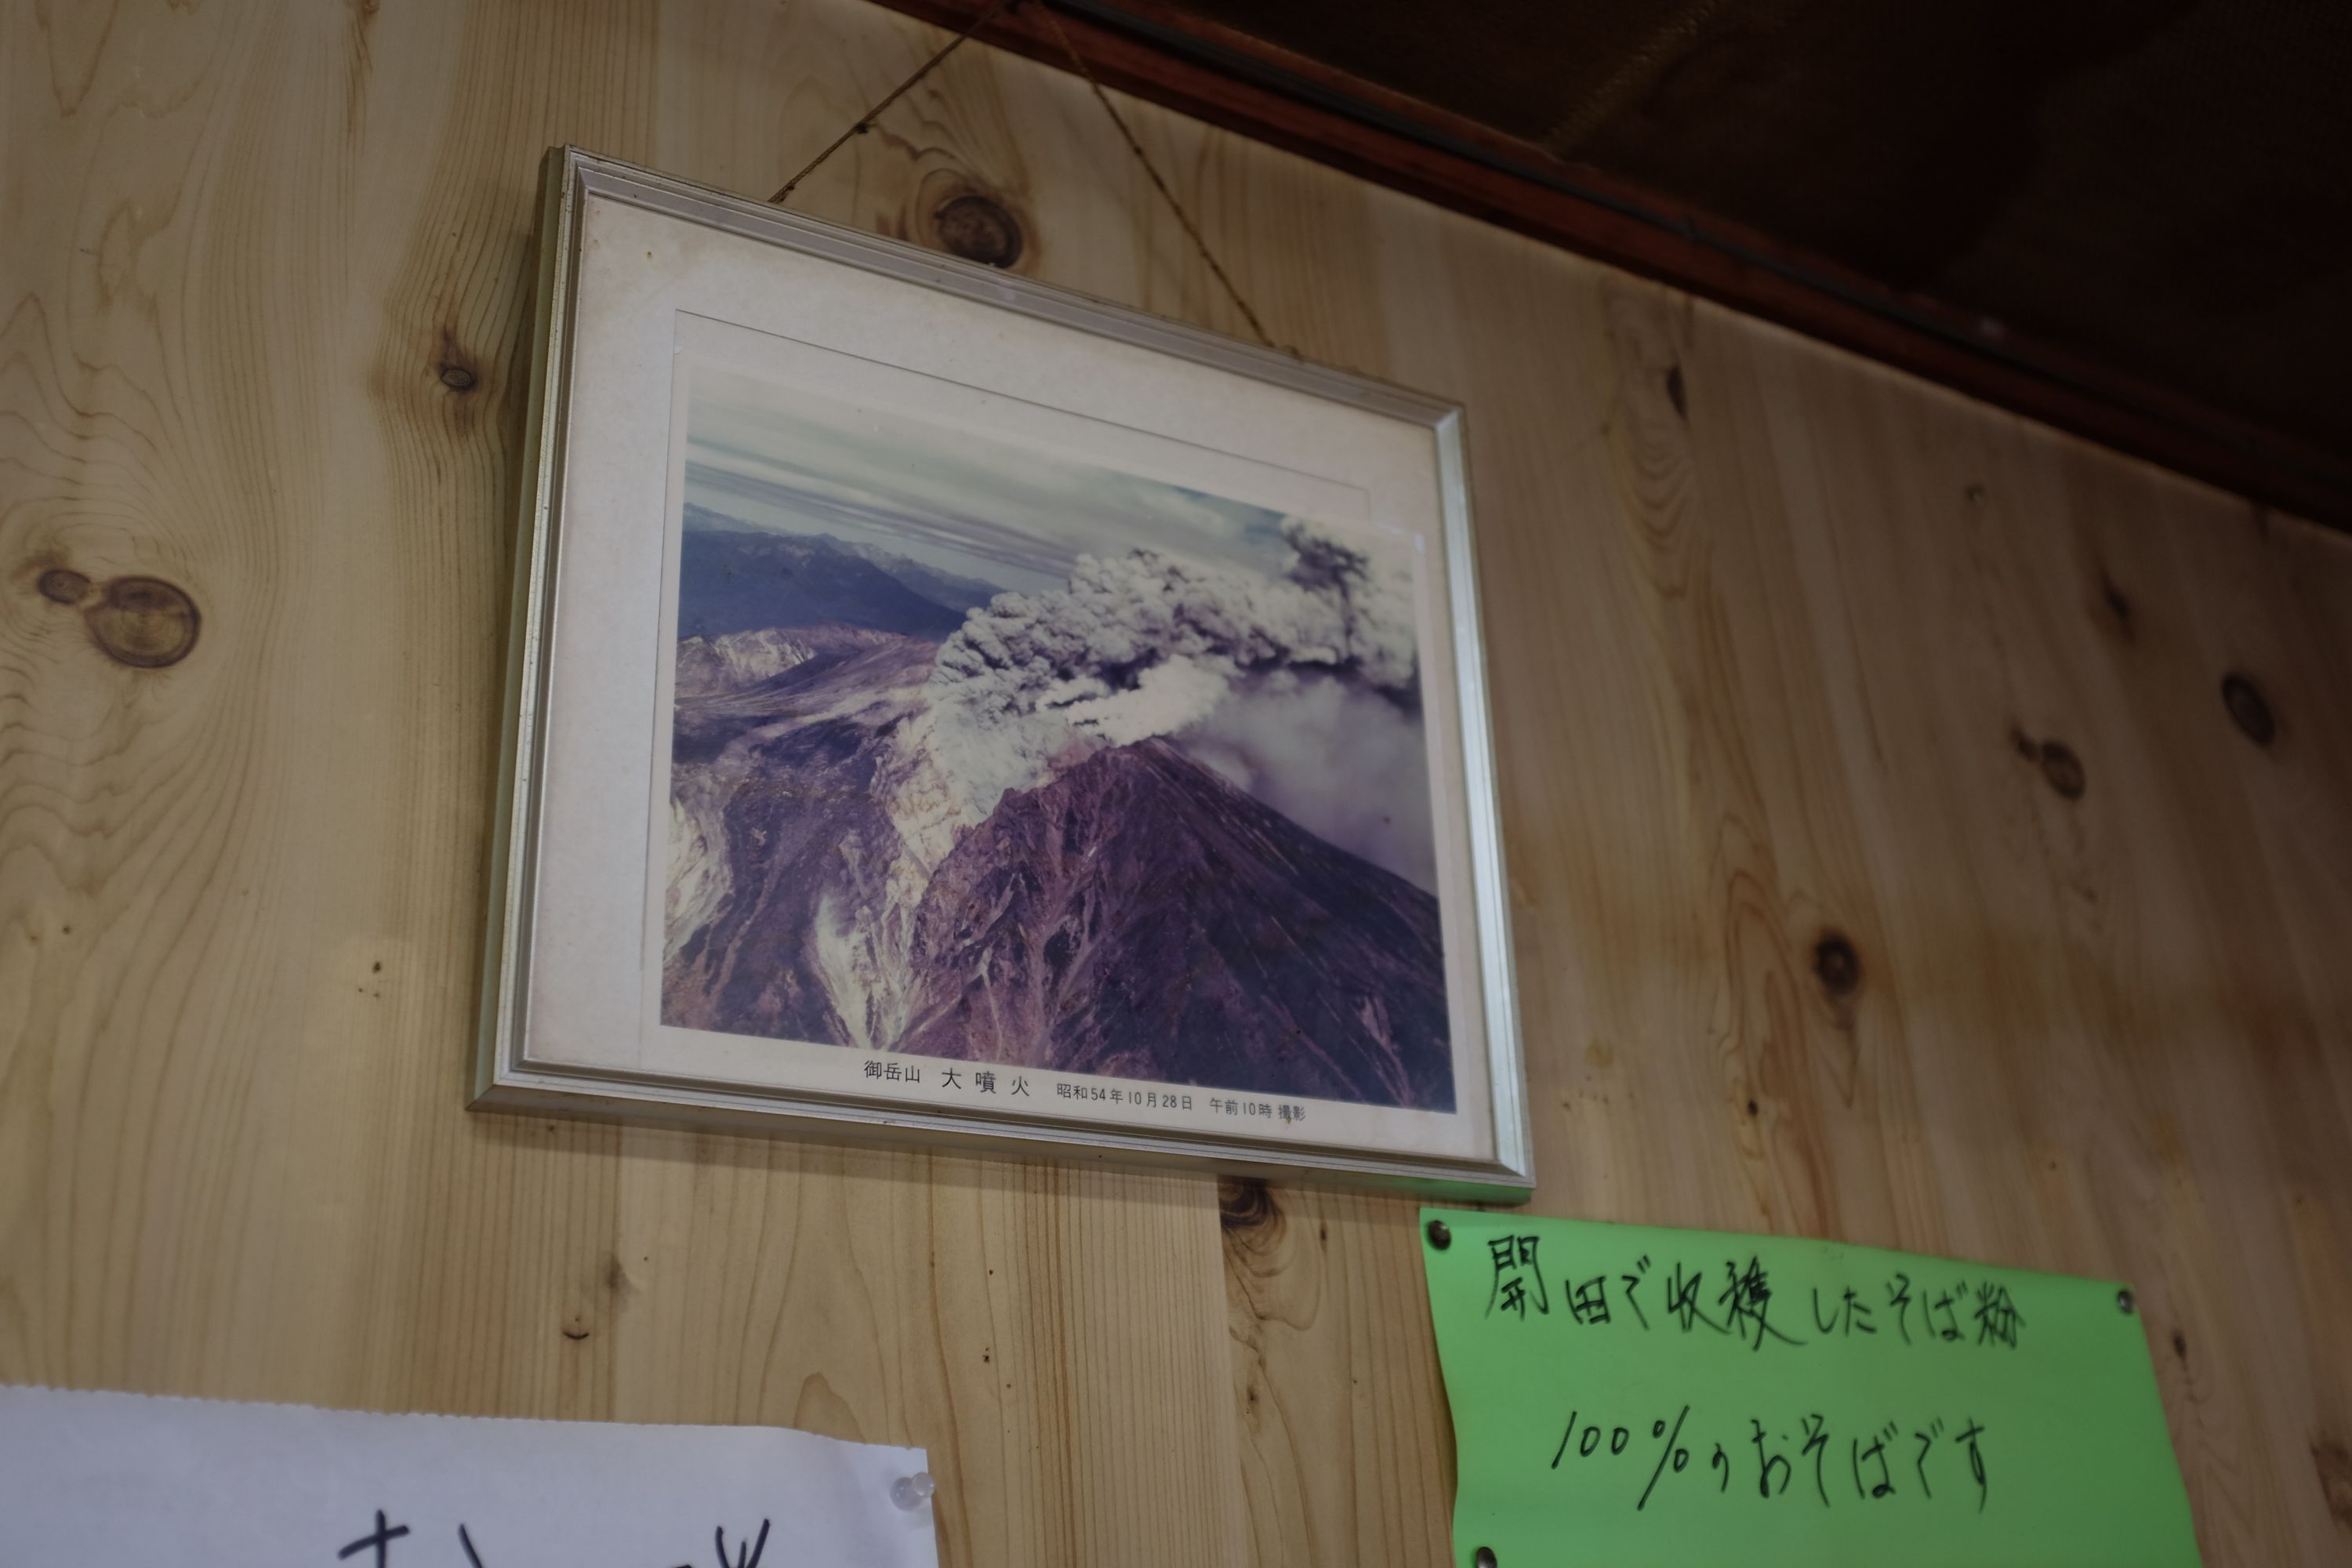 An old photograph on a wall which shows the 1979 eruption of Mount Ontake.